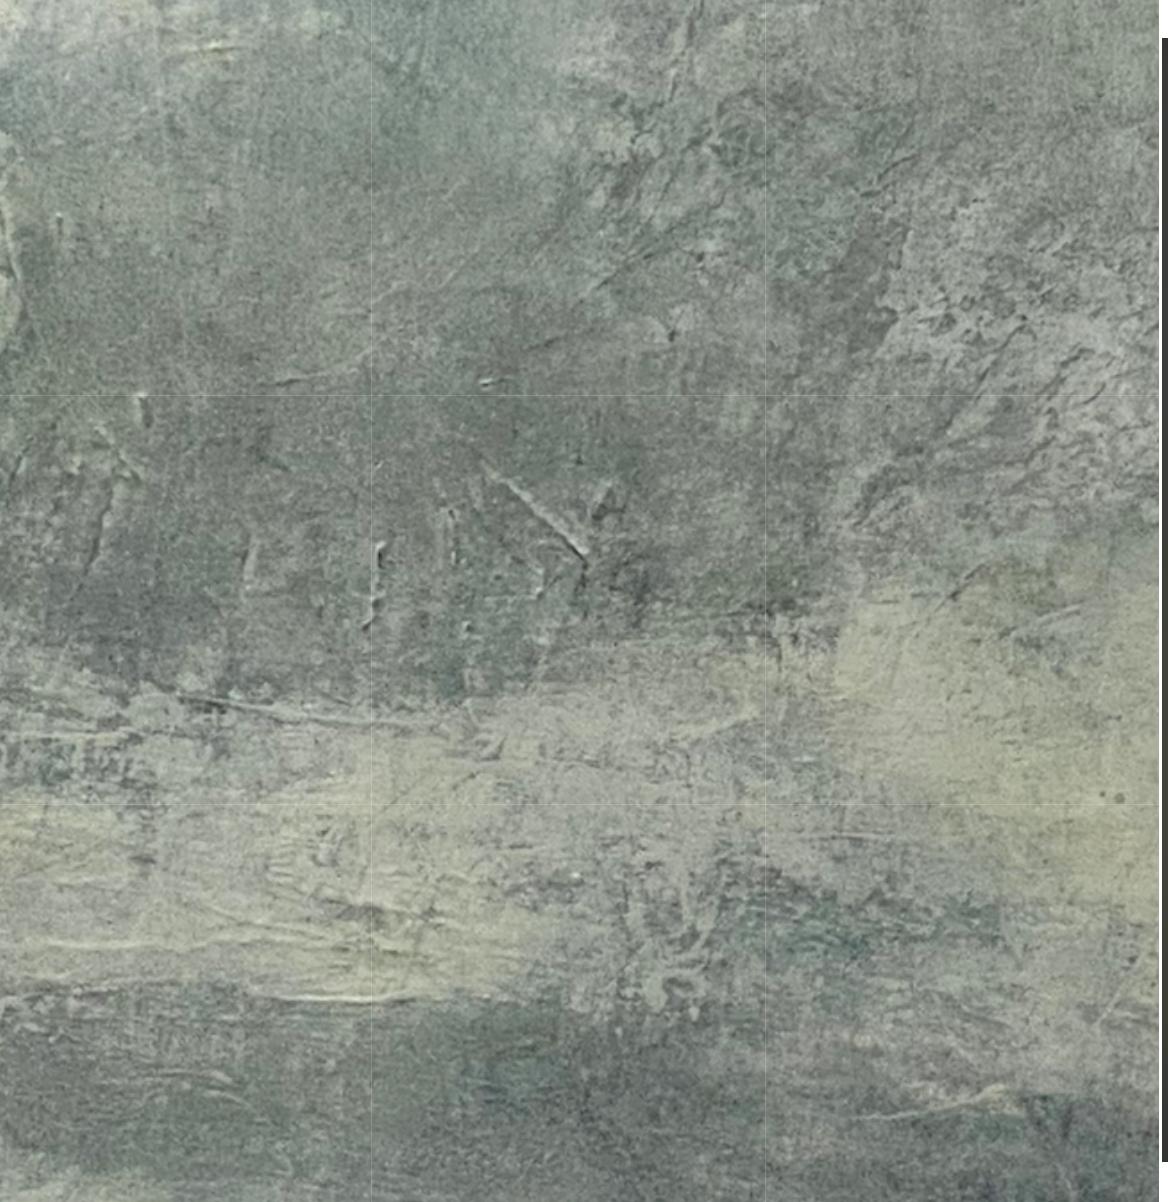 It was a misty day, Contemporary landscape, seafoam, ethereal abstract,   For Sale 2